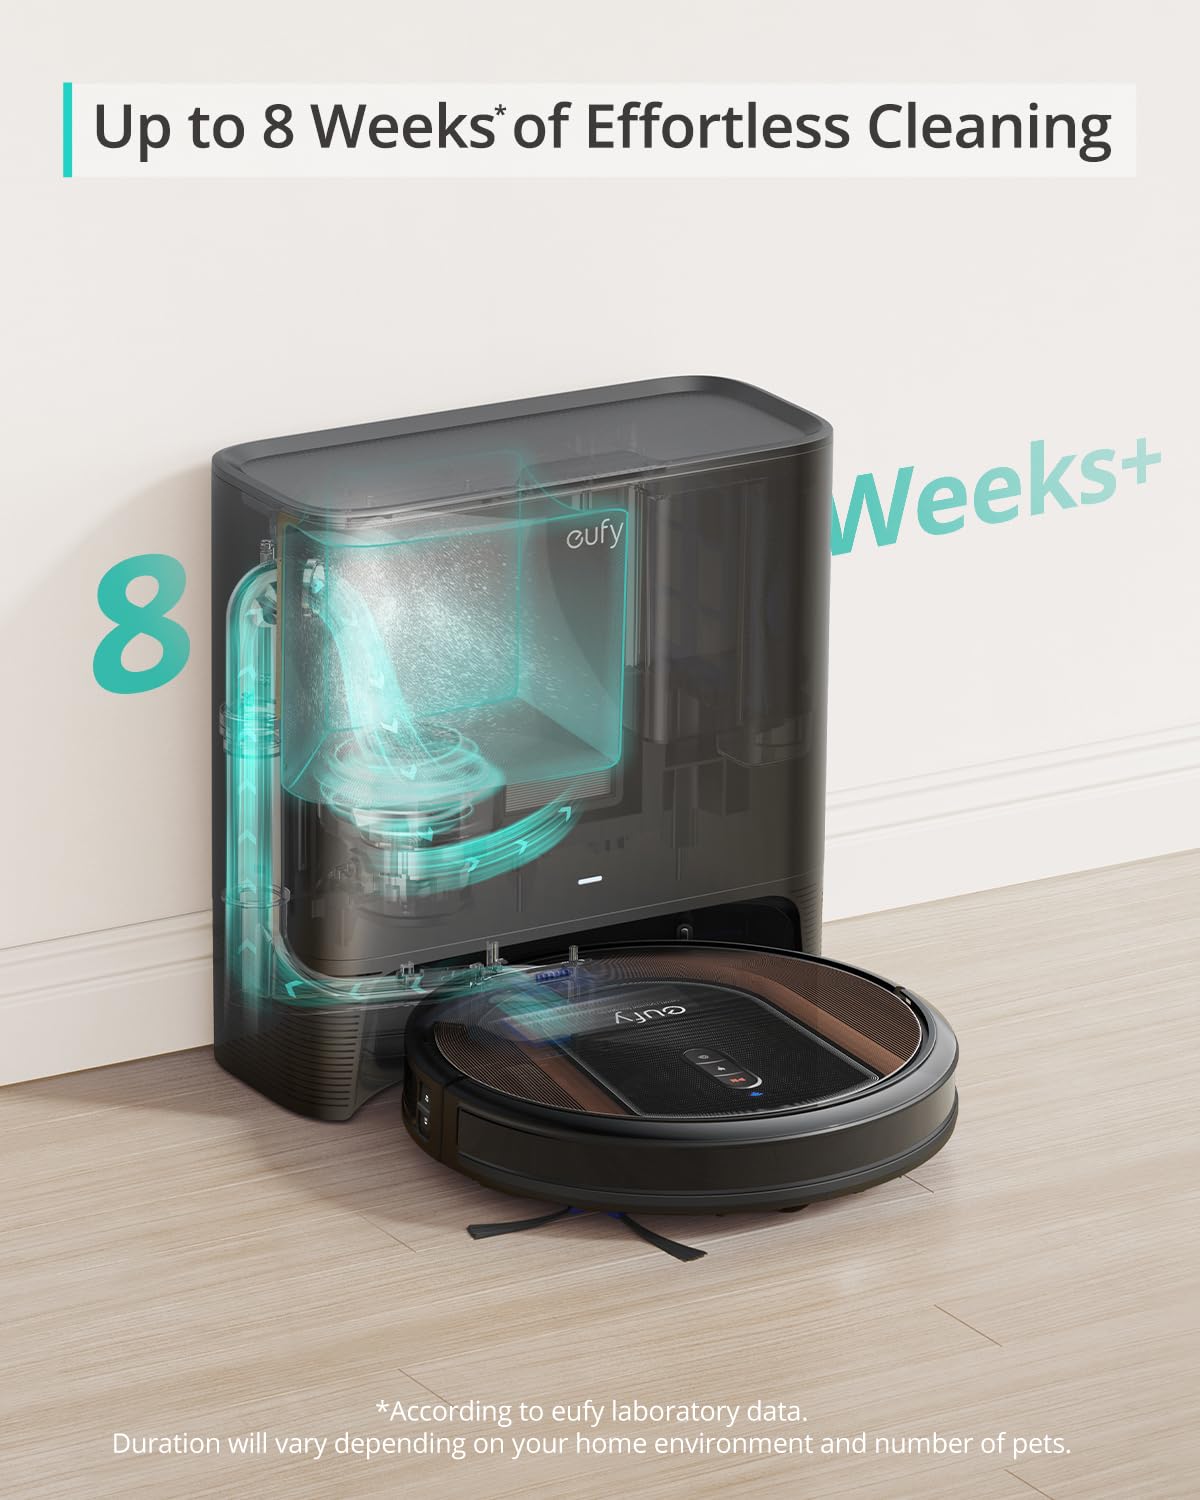 Prime Exclusive: Clean by Anker RoboVac G30 Hybrid+ 2-in-1 Sweep and mop, Self-Emptying Robot Vacuum $290 + Free Shipping